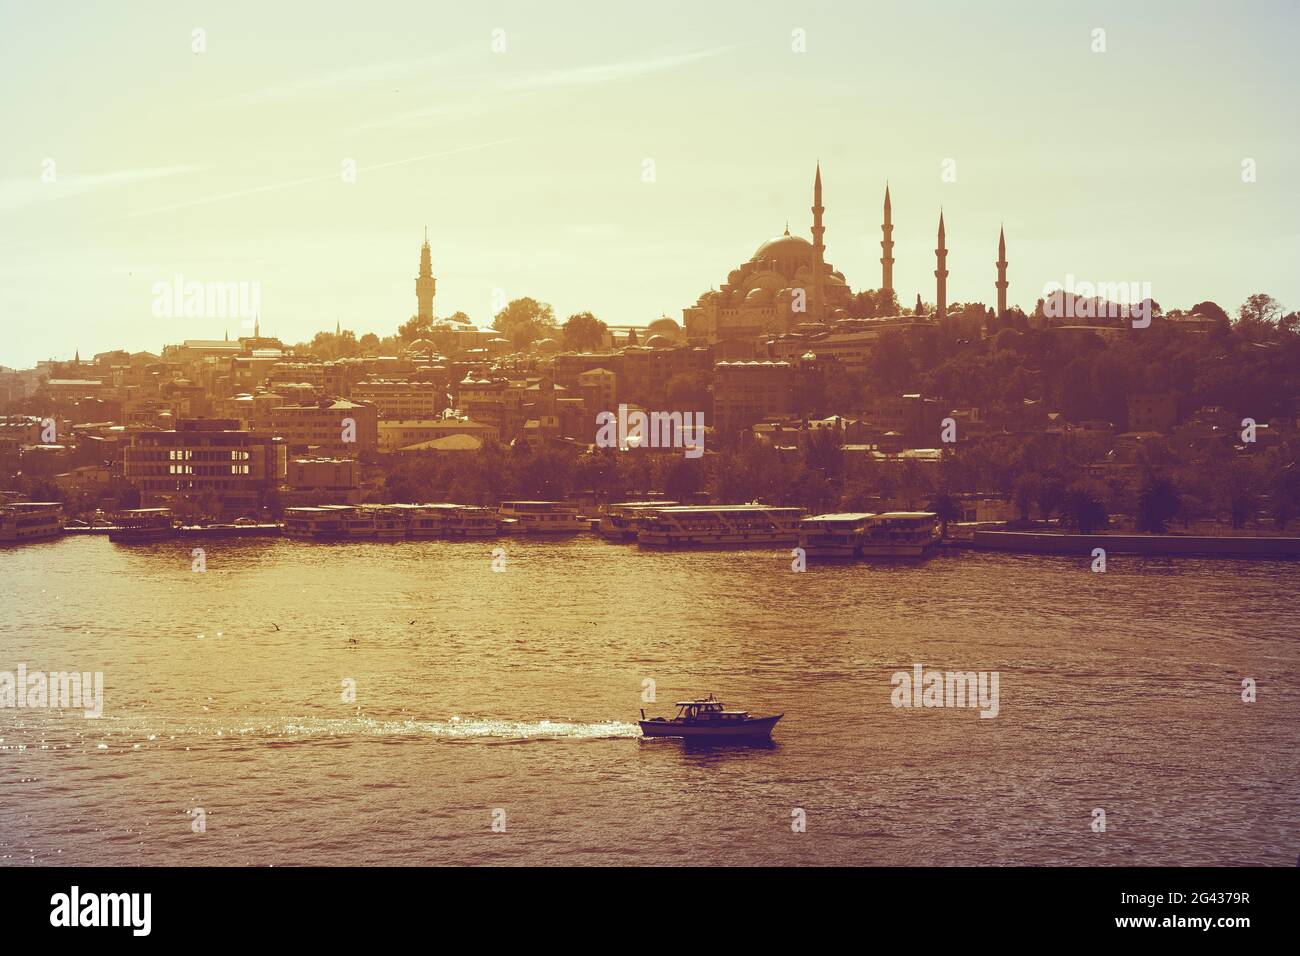 Istanbul Cityscape with famous building silhouette Stock Photo